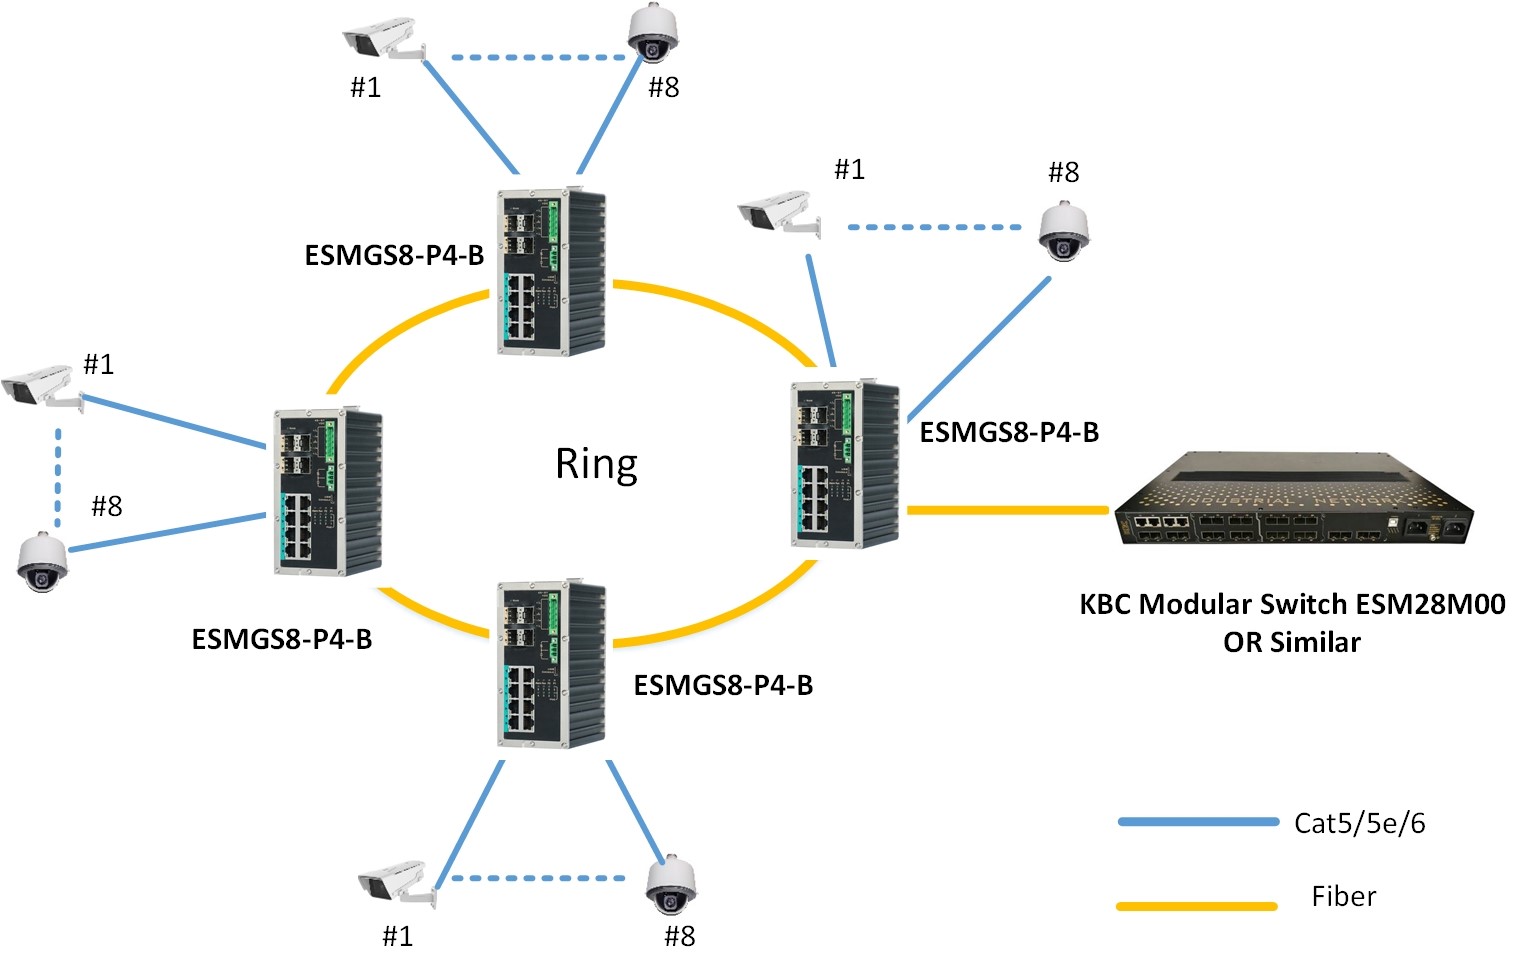 Typical System configuration for ESMGS8-P4-B